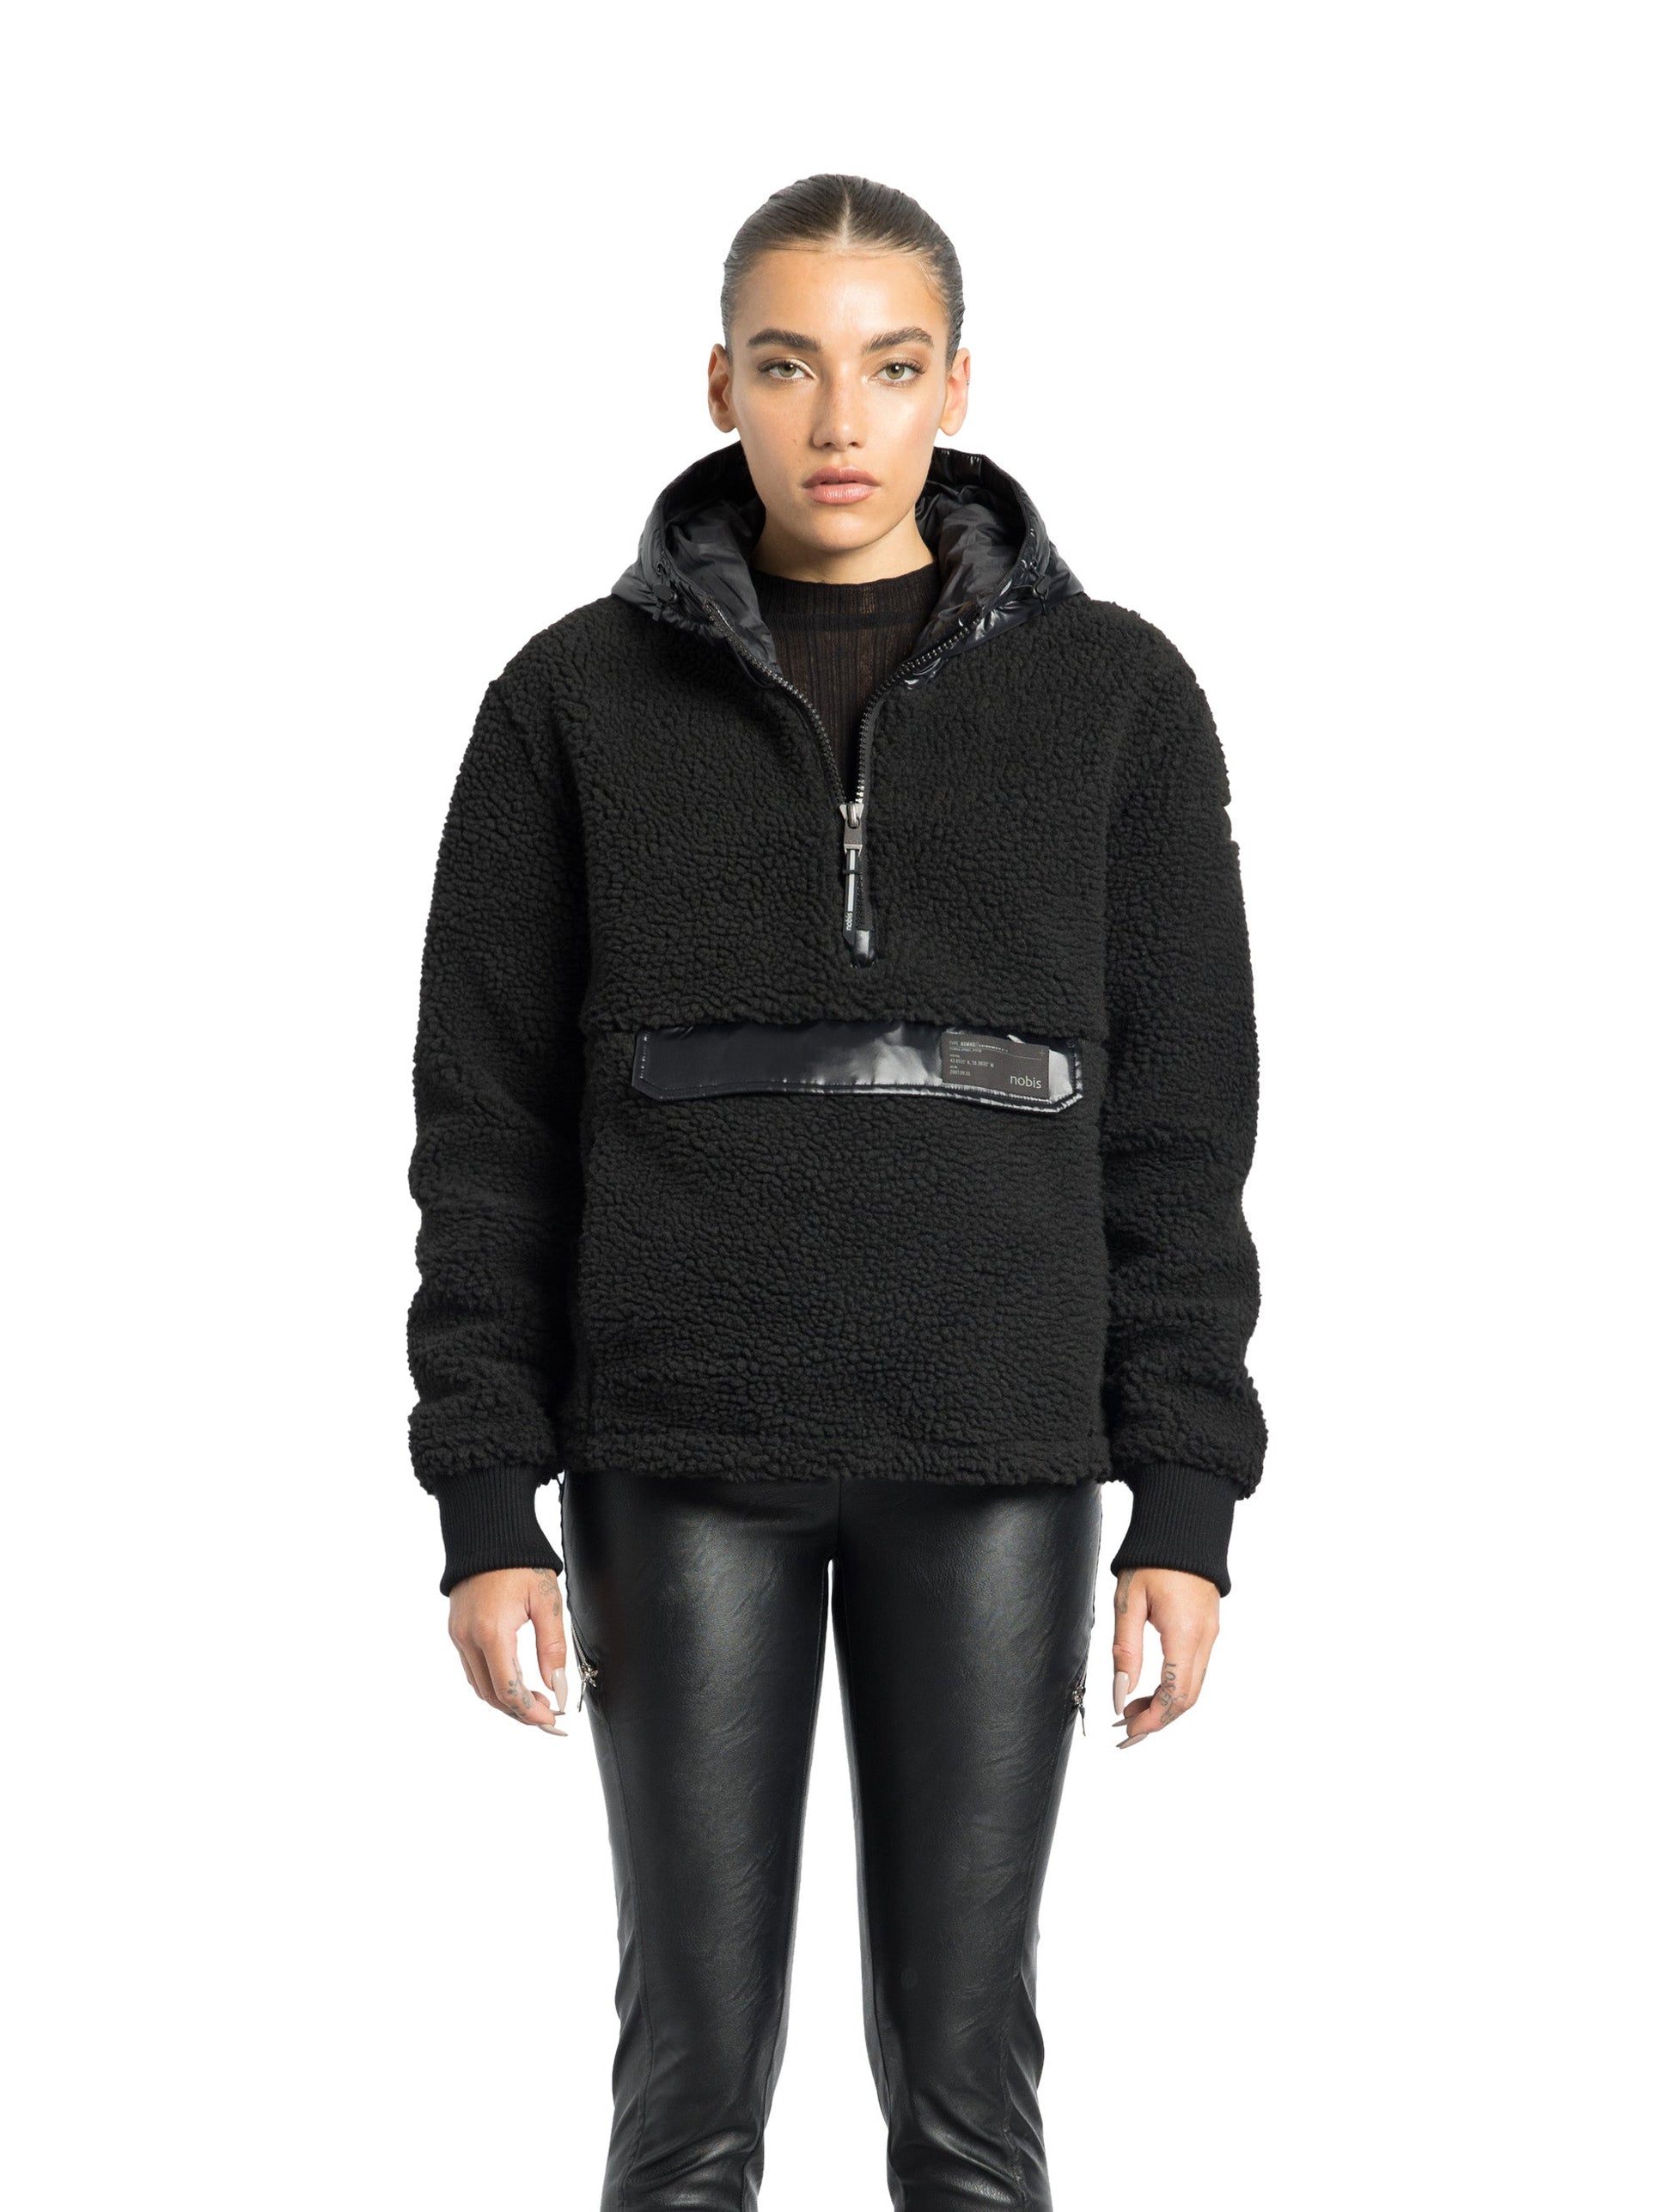 Roche Women's Hybrid Berber Pullover Hoodie in hip length, premium berber and cire technical nylon taffeta fabrication, Primaloft Gold Insulation Active+, non-removable hood with zipper at collar, kangaroo pocket with magnetic closure flap and additional side-entry pockets, ribbed cuffs, adjustable drawcords at side hem, in Black